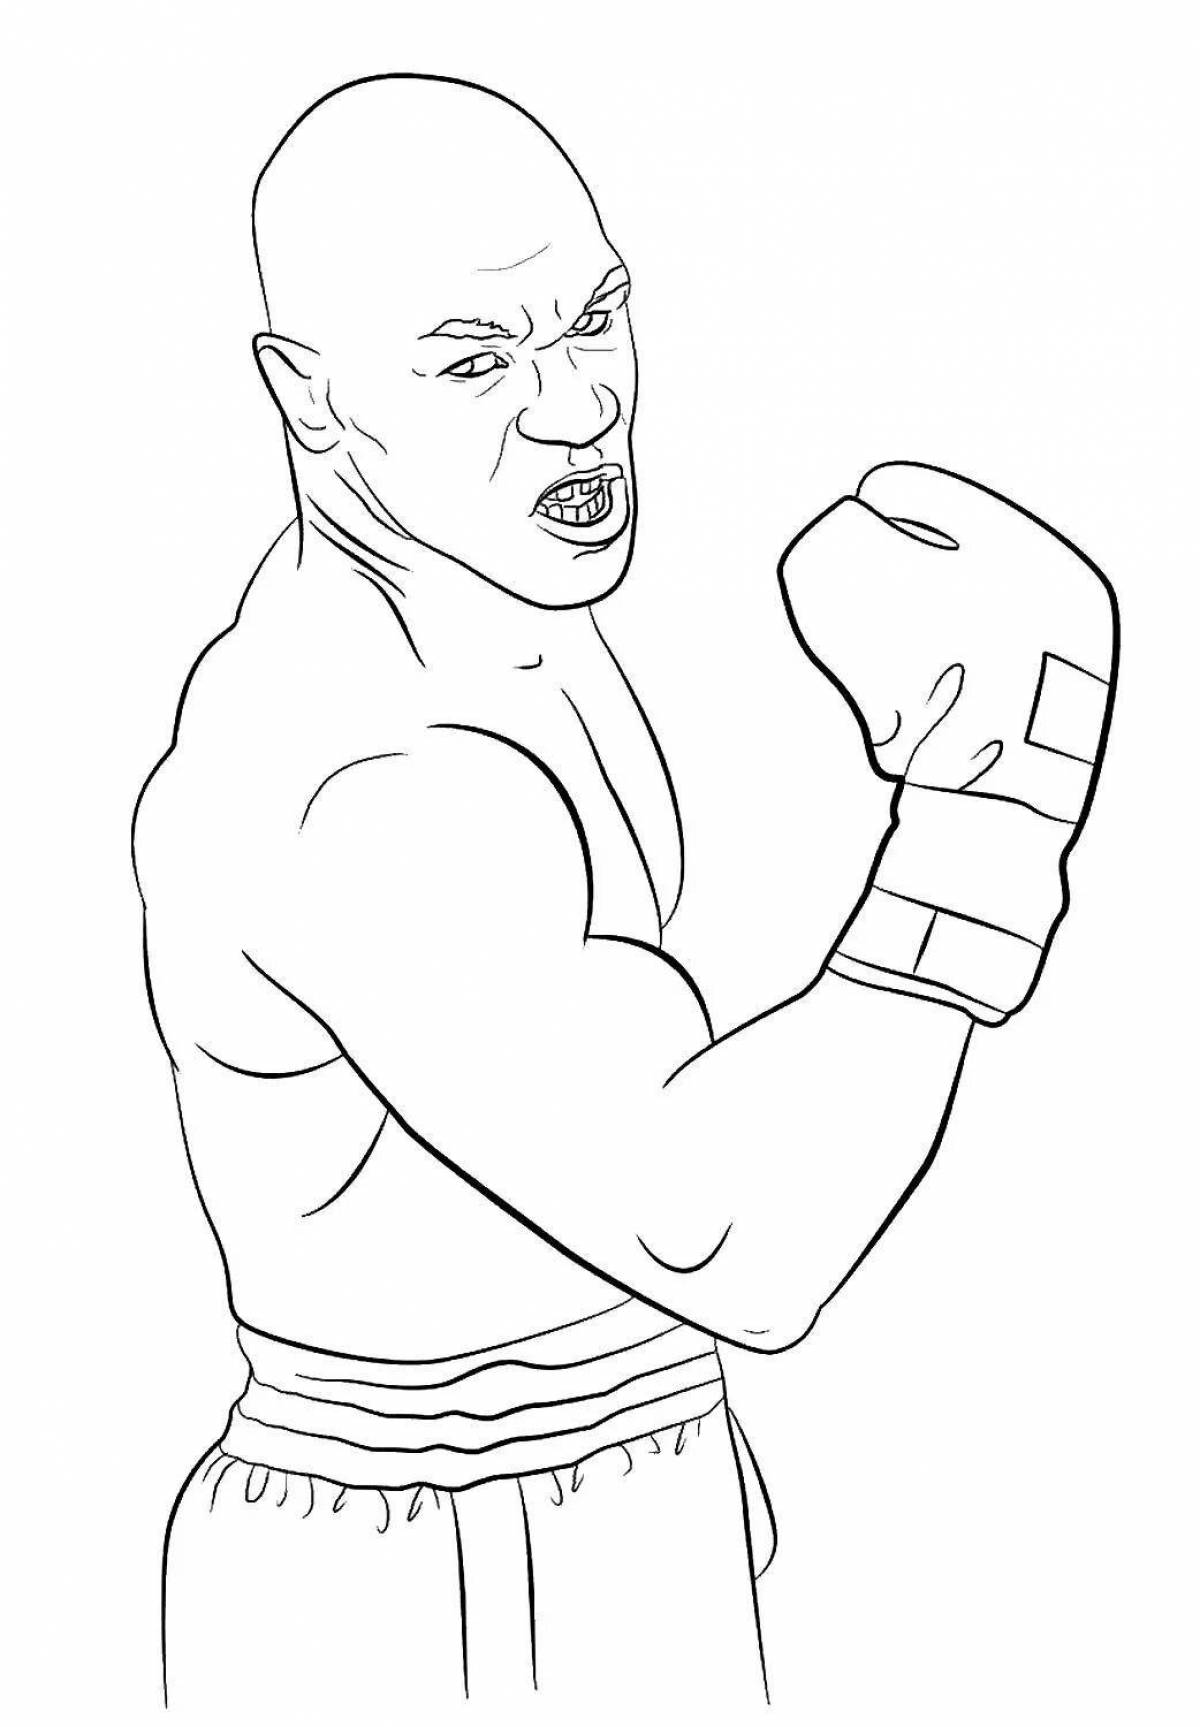 Coloring book glowing mystery of boxing